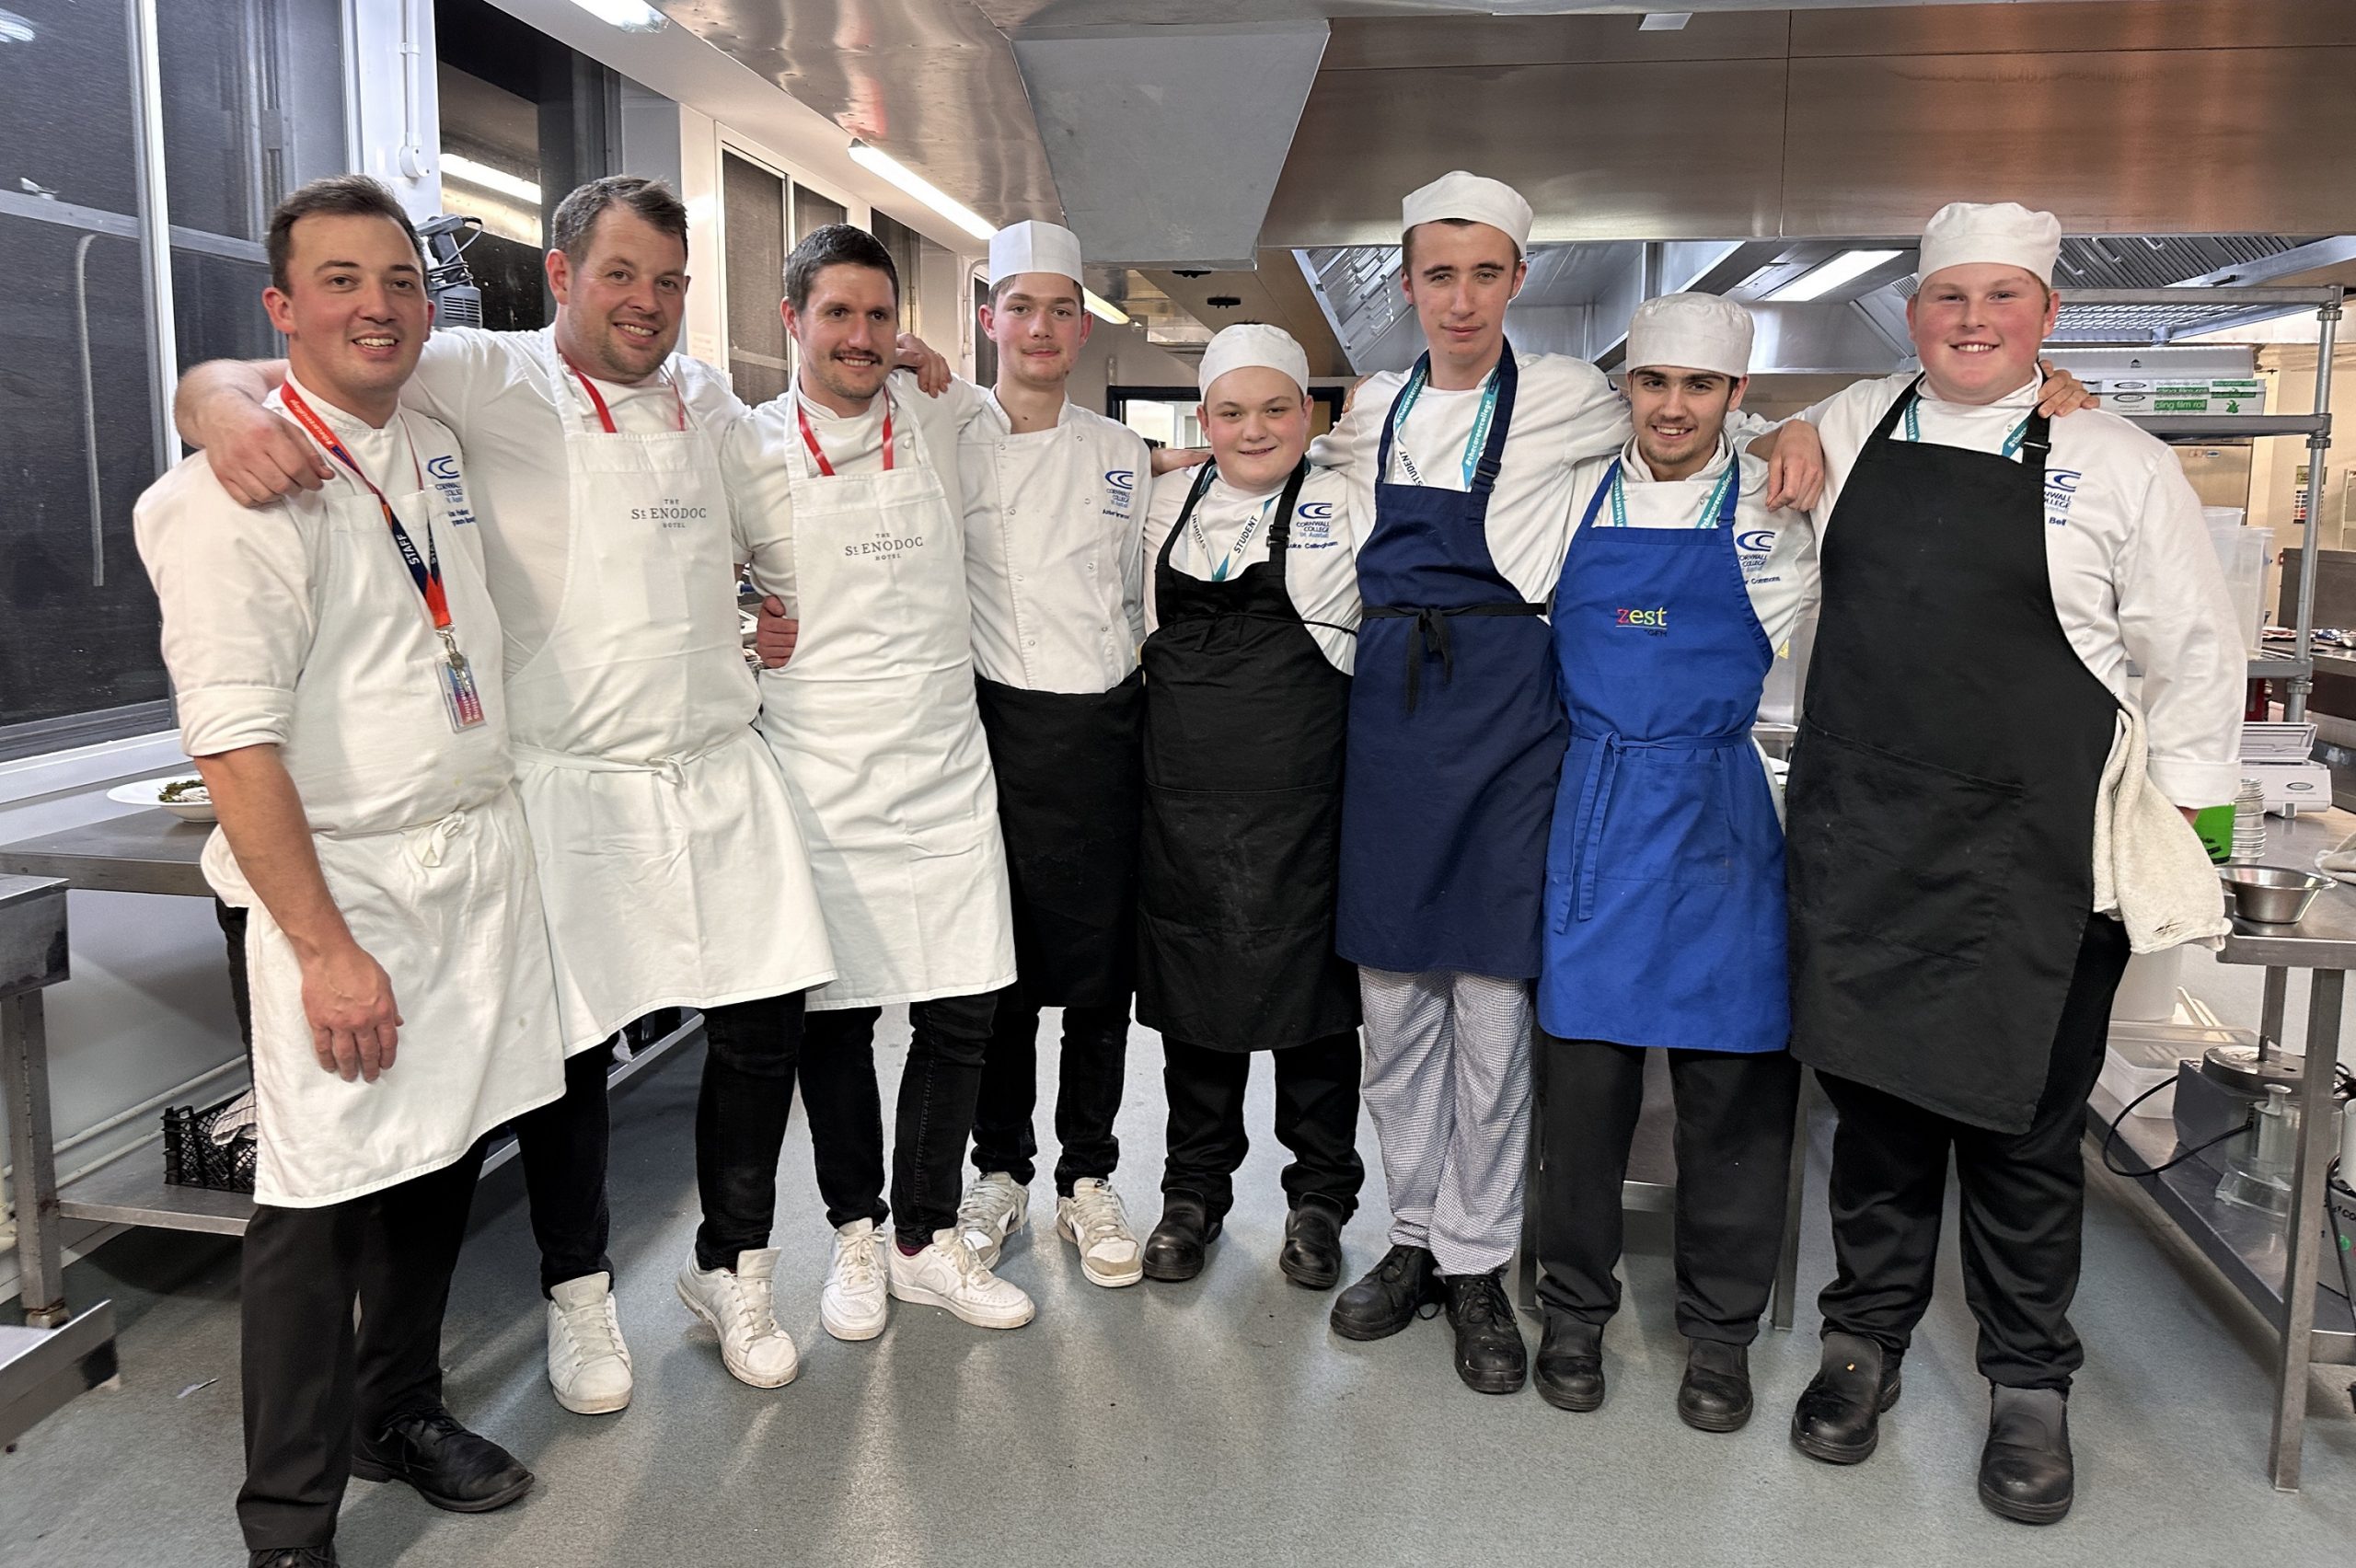 Cookery students join forces with acclaimed chef